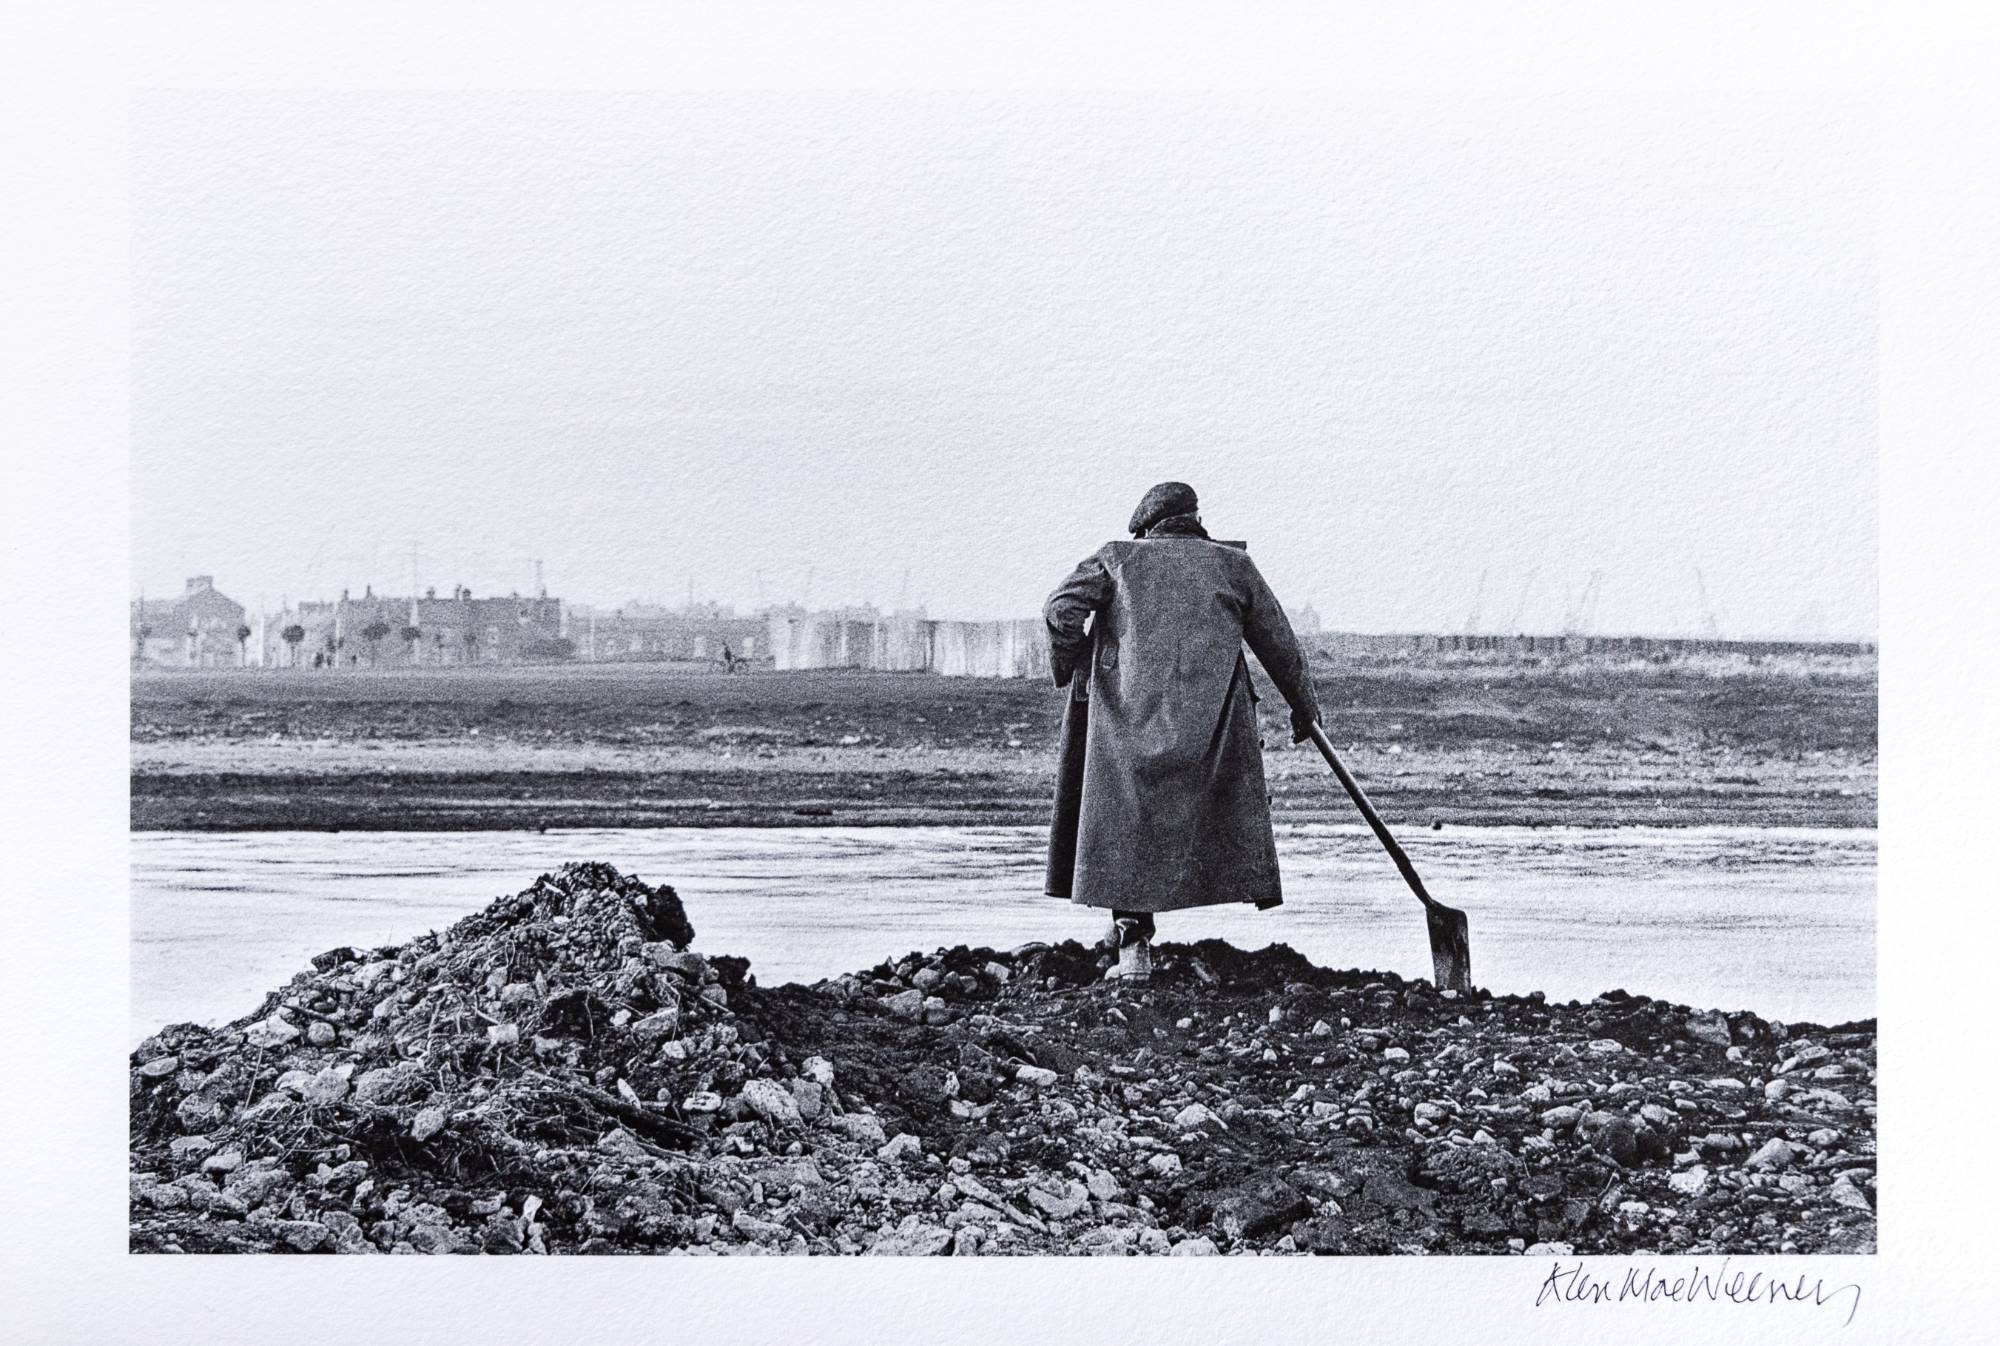 man standing on rocky river bank leaning on shovel looking out across the river